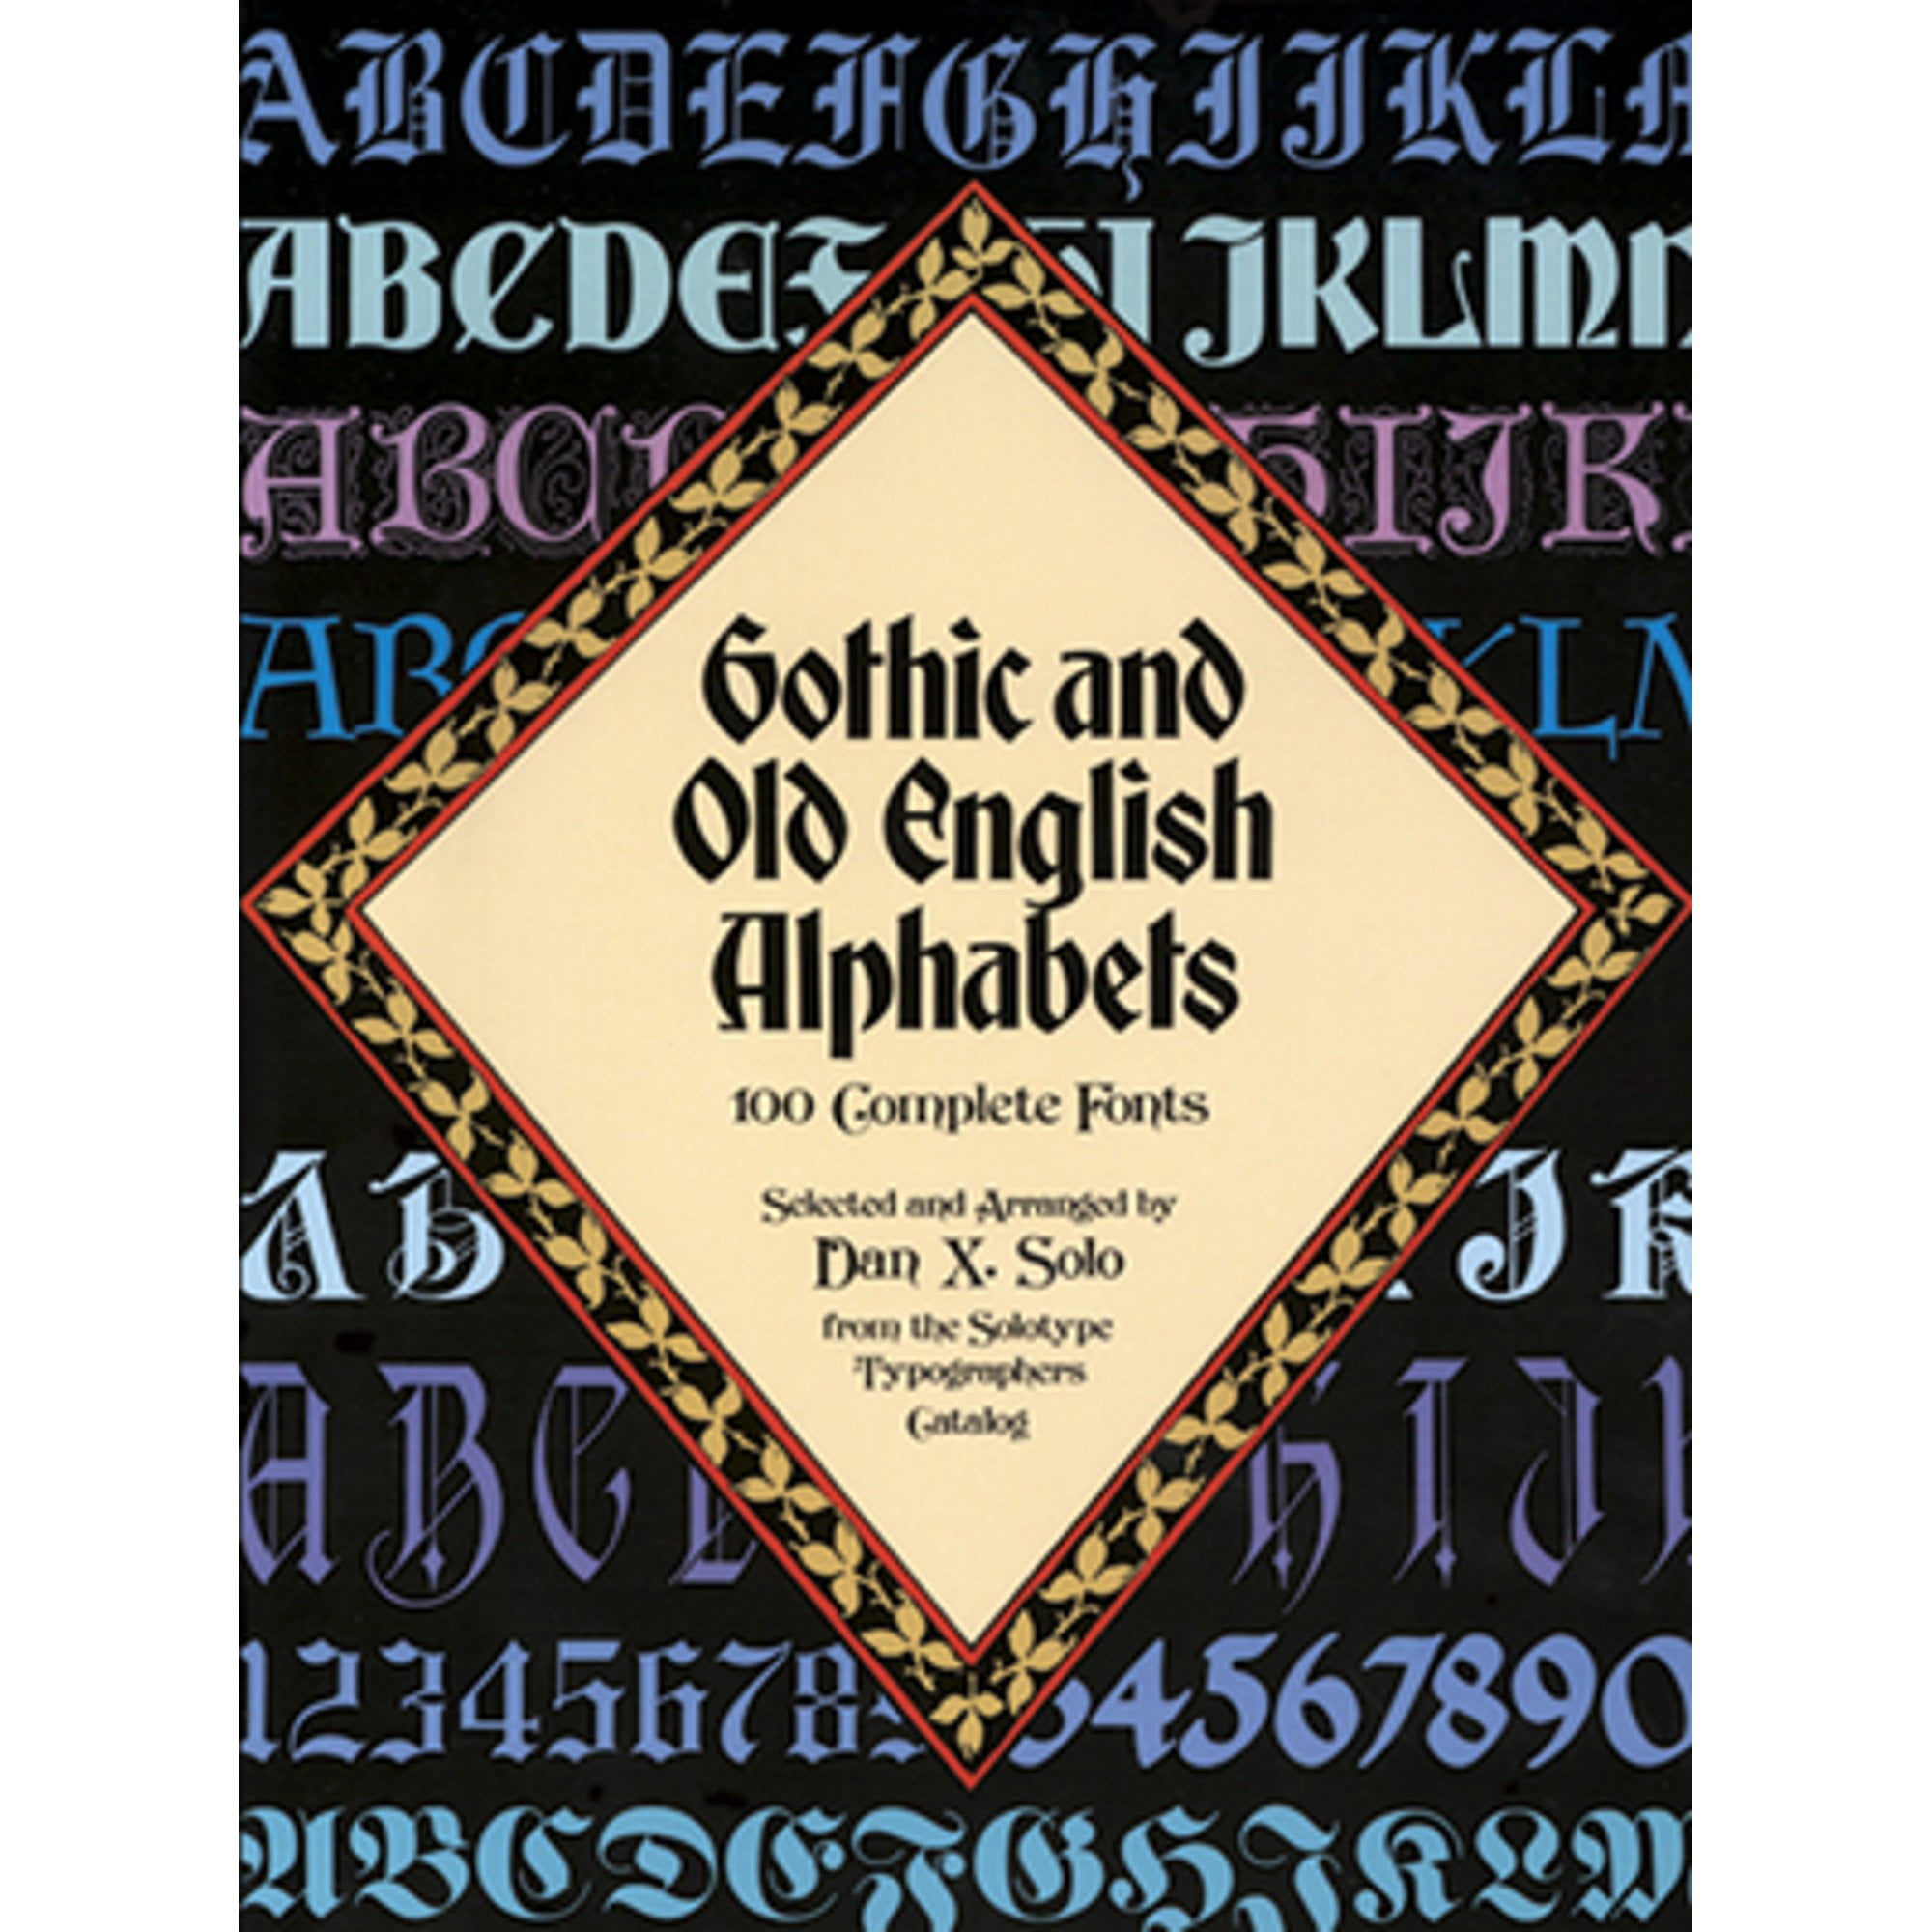 Old English 3 Alphabet and Numbers - Mylar Uppercase and Lowercase Alphabet for Hand Painting, Drawing & Cutting - Perfect for Lettering on Wood